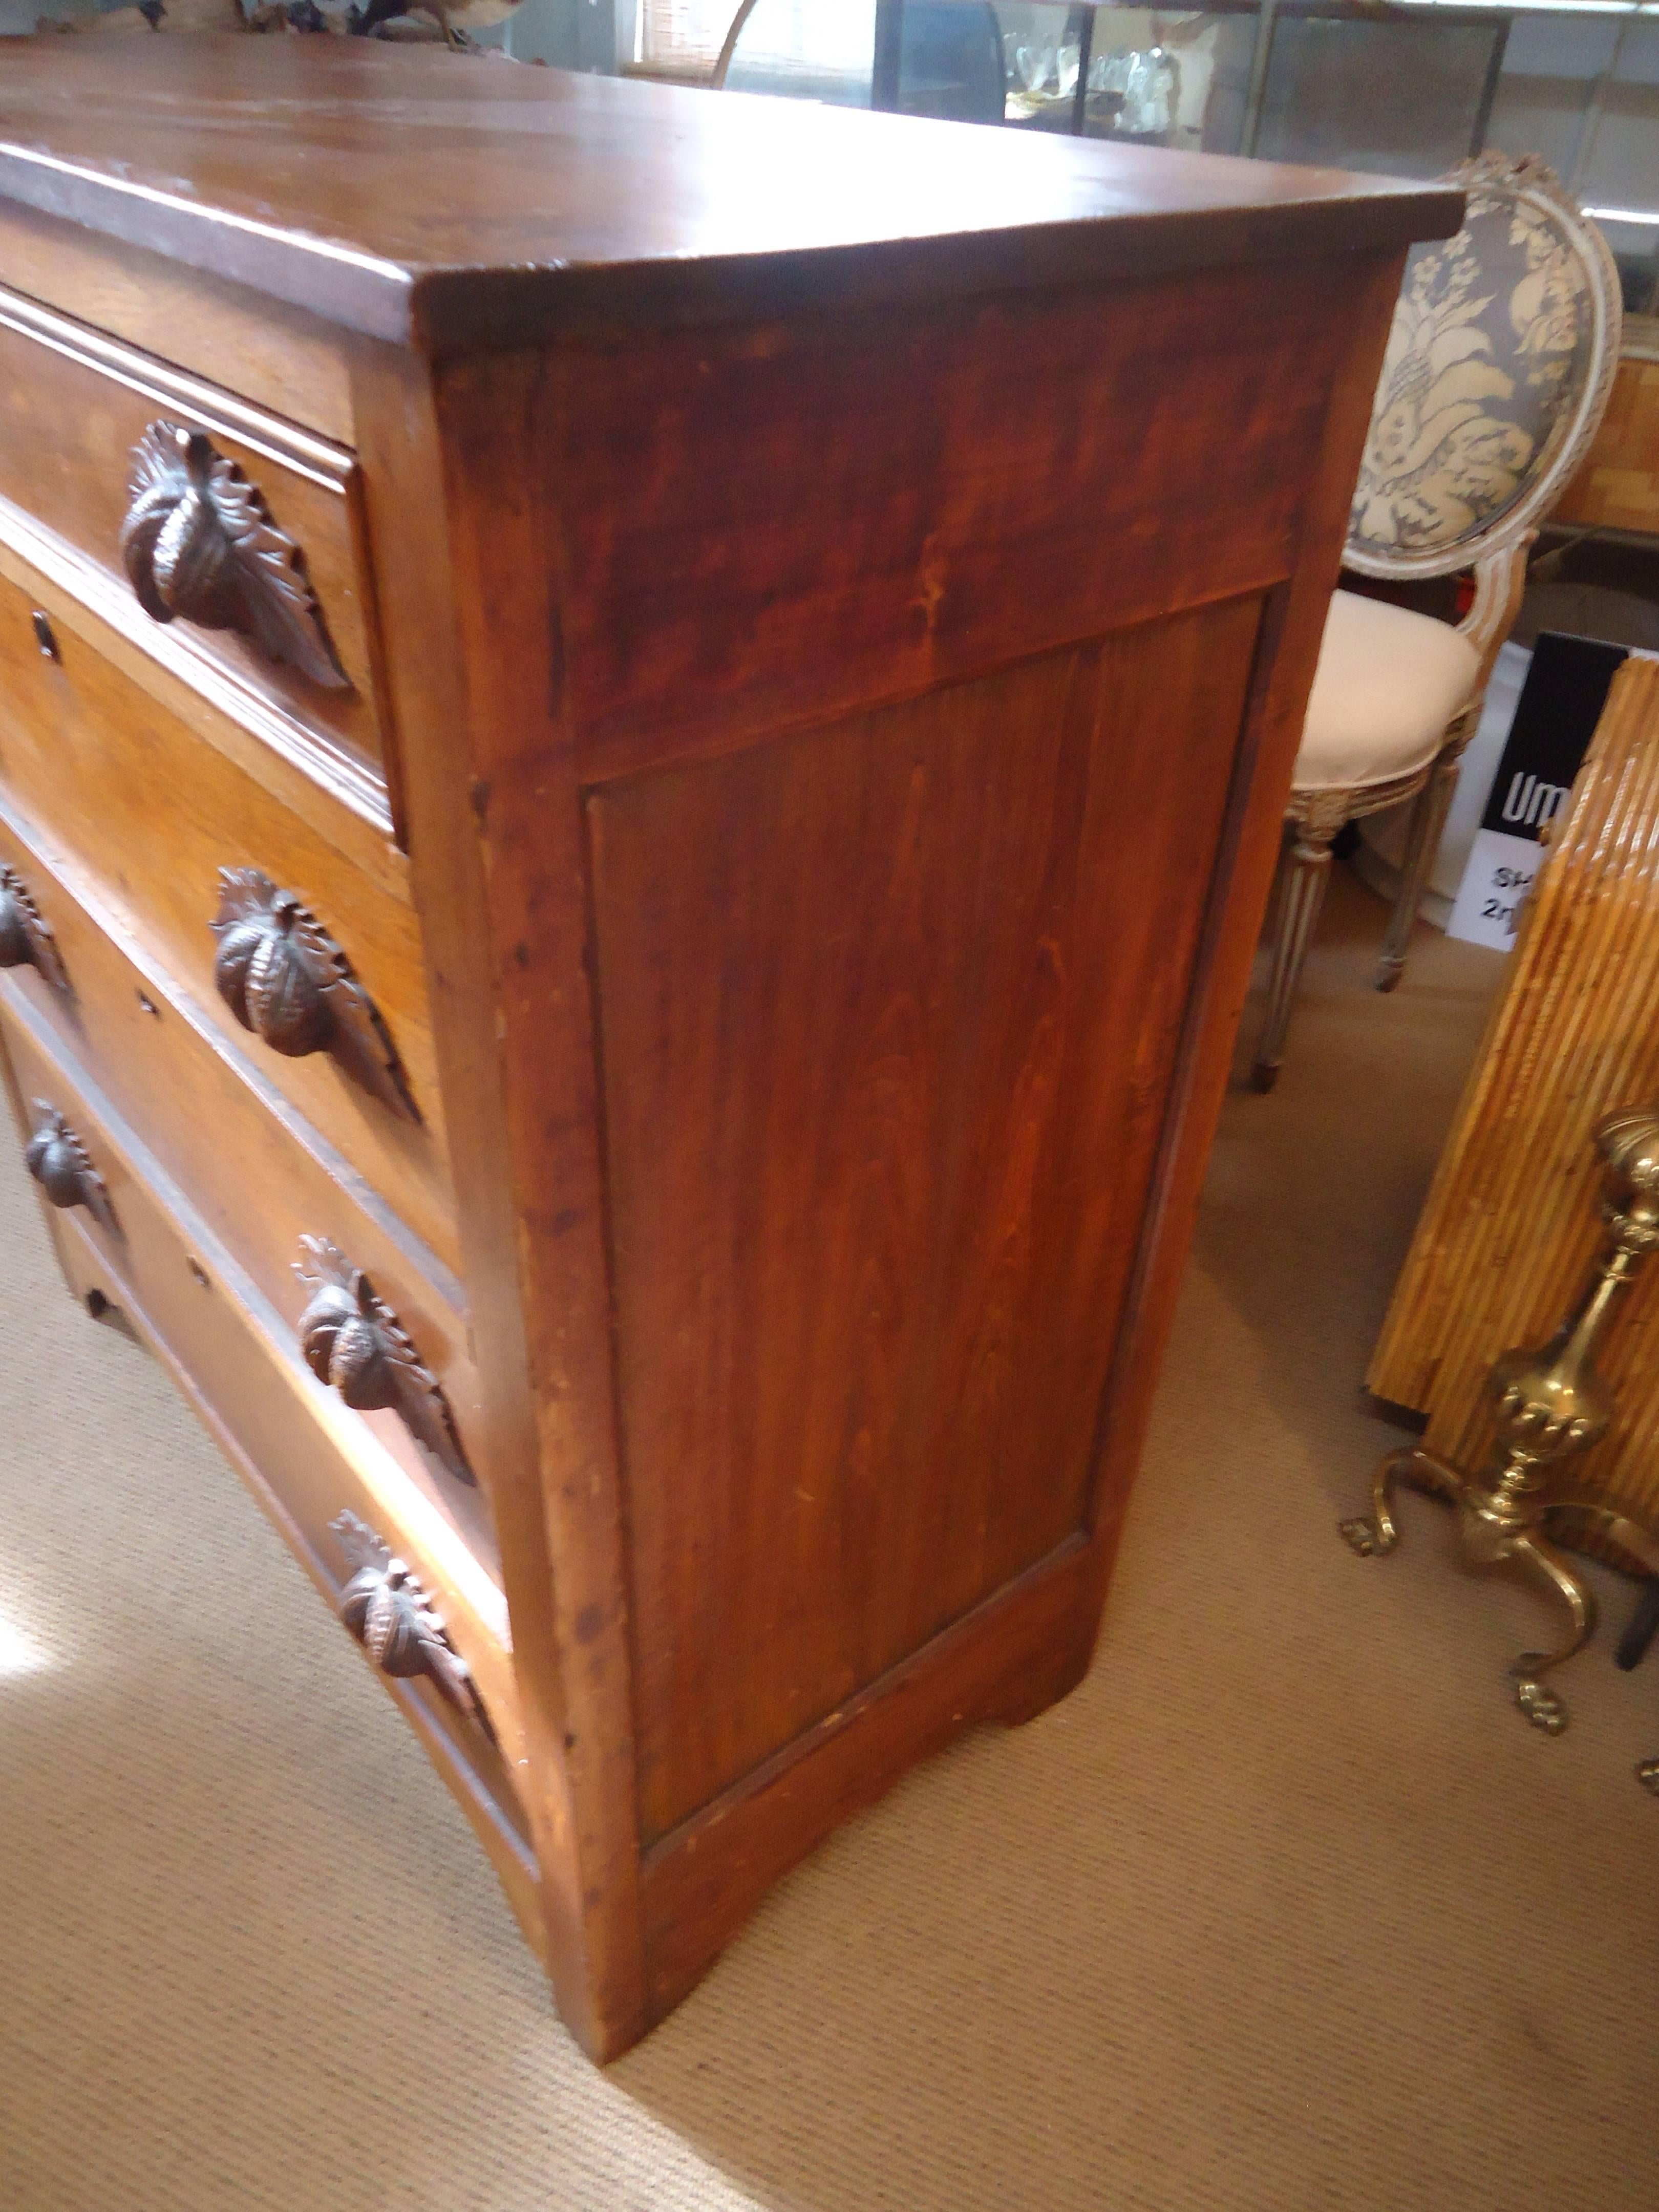 Great medium sized walnut dresser with four drawers and wonderful carved wood handles in a leaf and nut motif.